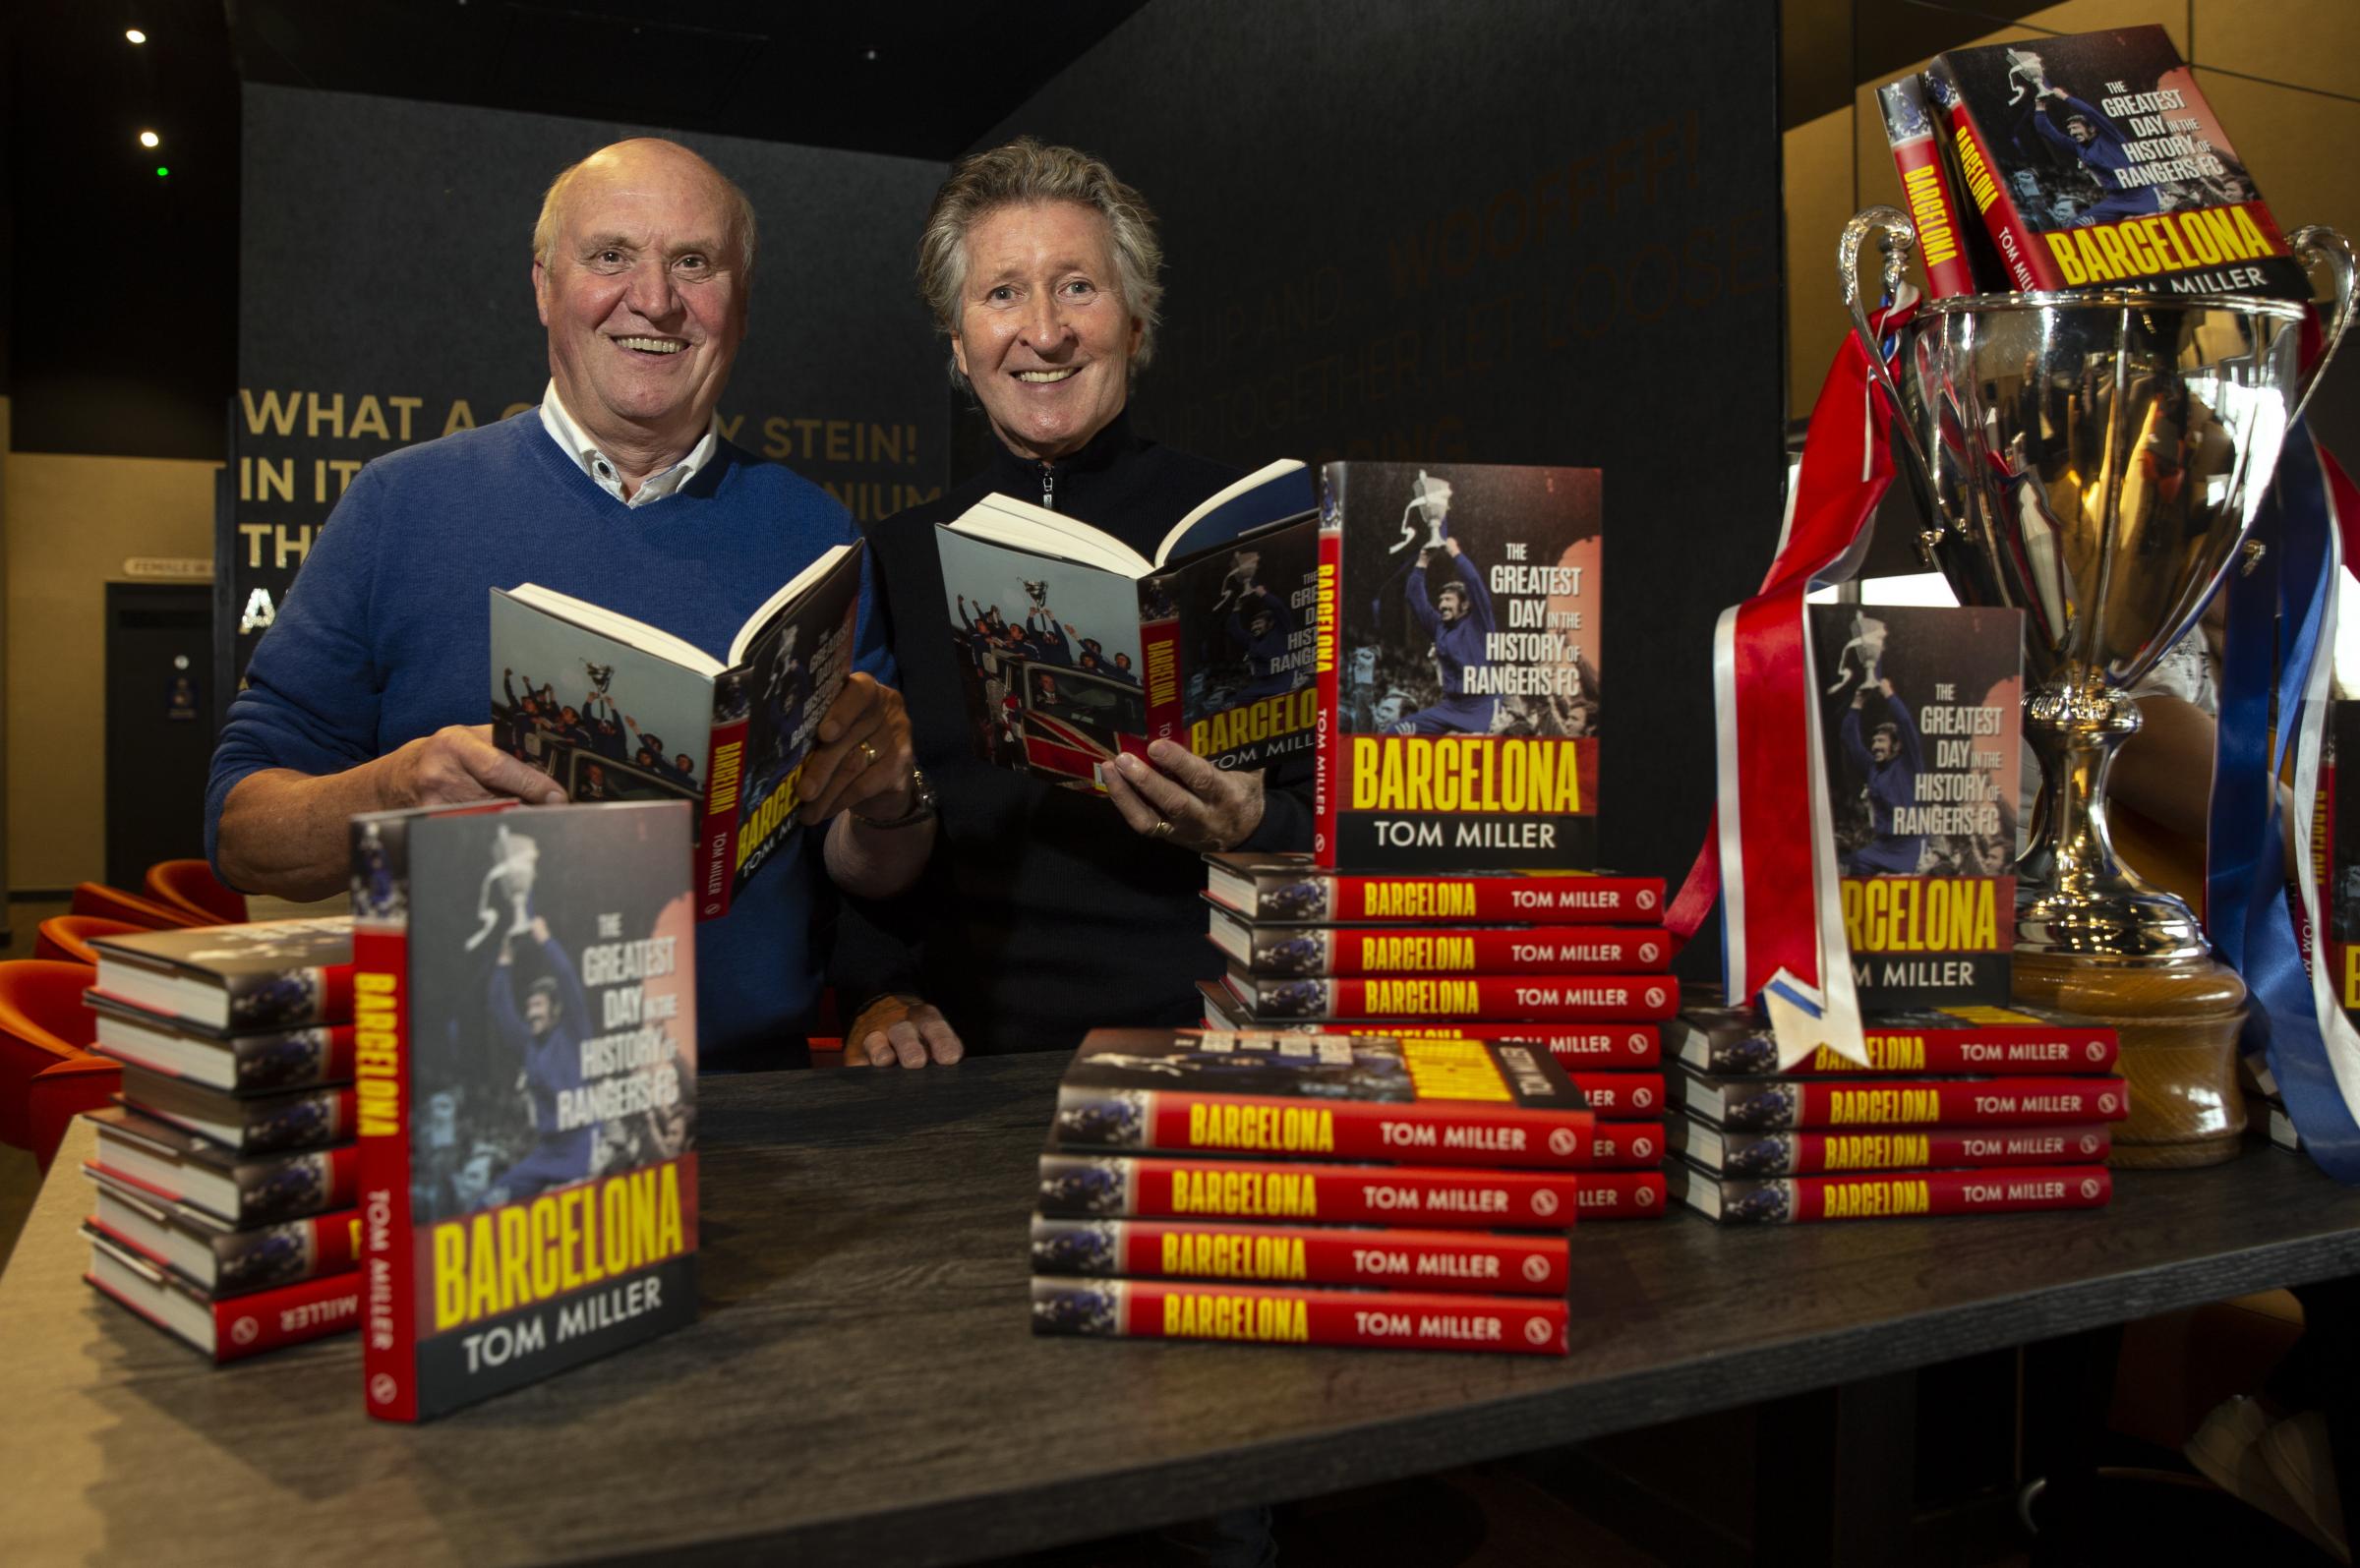 Pictured are former Rangers players Colin Stein, left and Derek Parlane at the launch the book Barcelona by Tom Miller